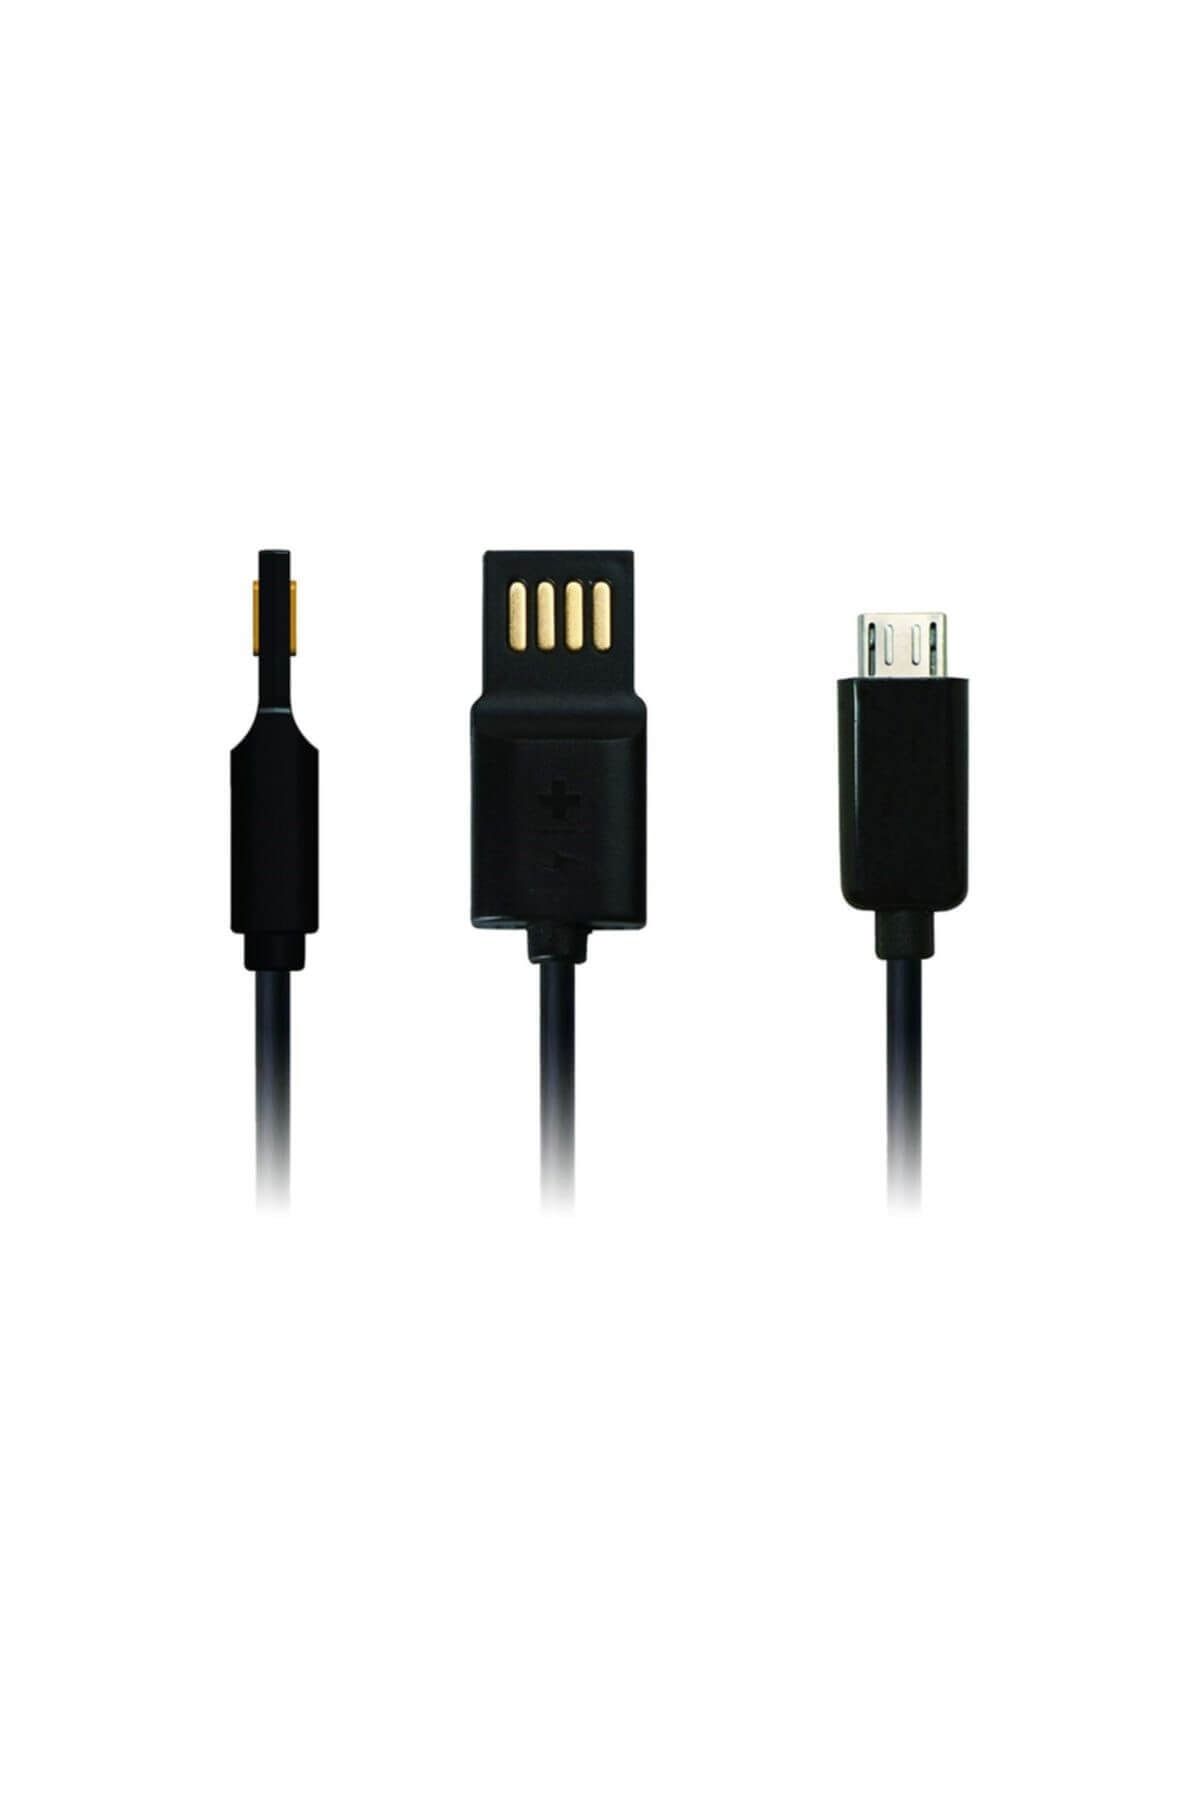 SWISS CHARGER Scc-10013 Micro Usb Kablo